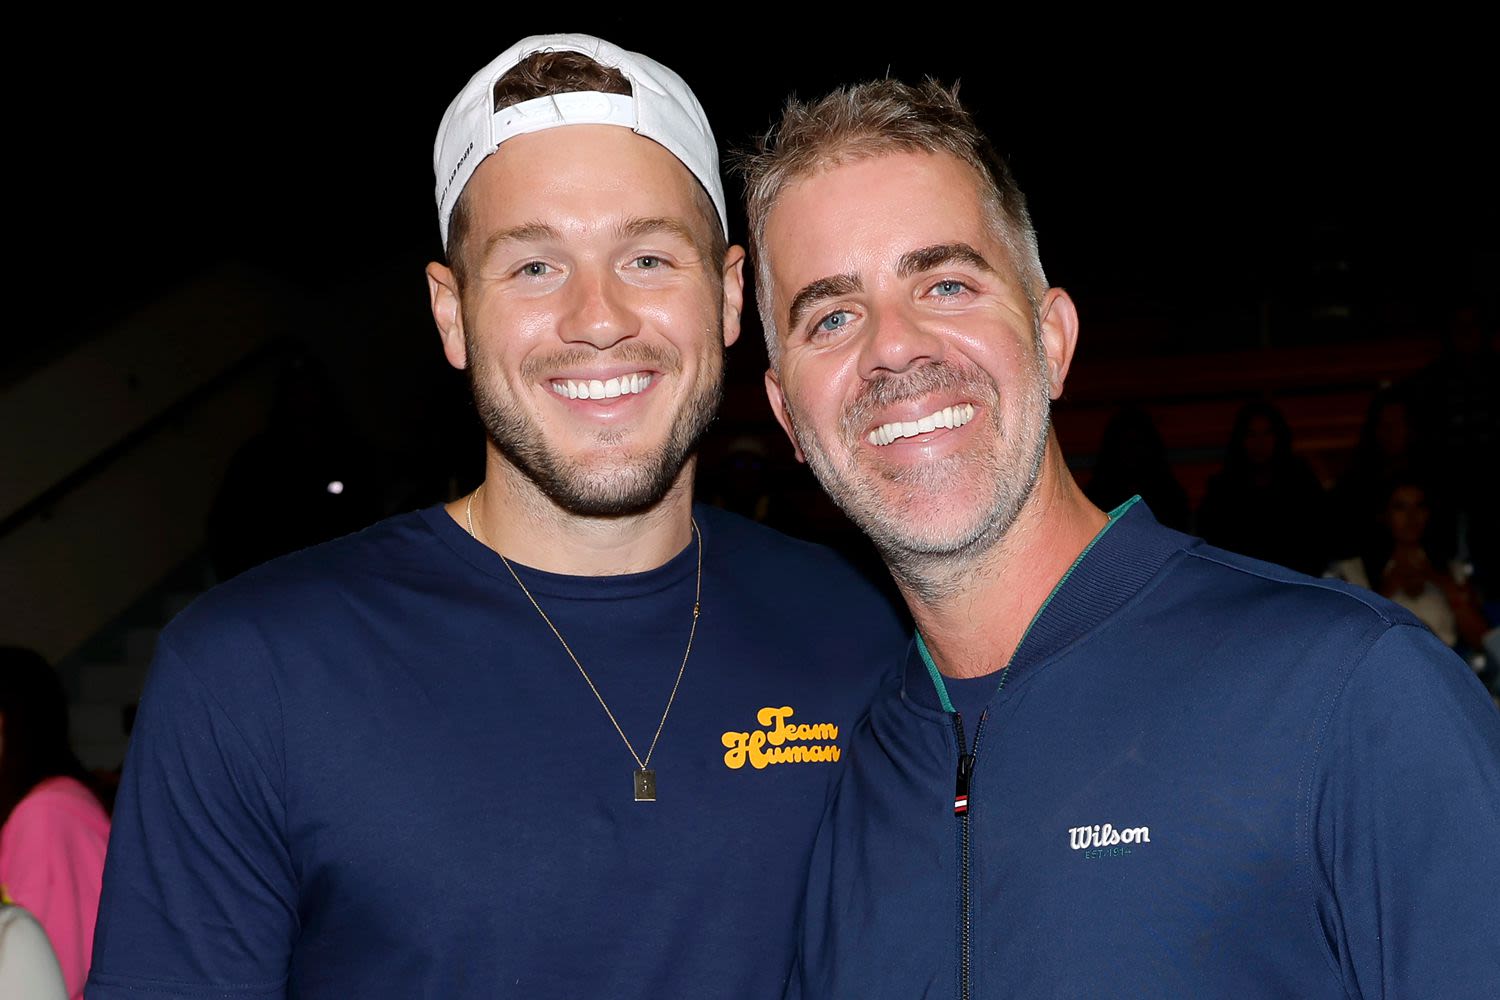 Colton Underwood Says He and Husband Don't Know Whose Sperm Was Used for Baby: 'Did That to Protect Ourselves'